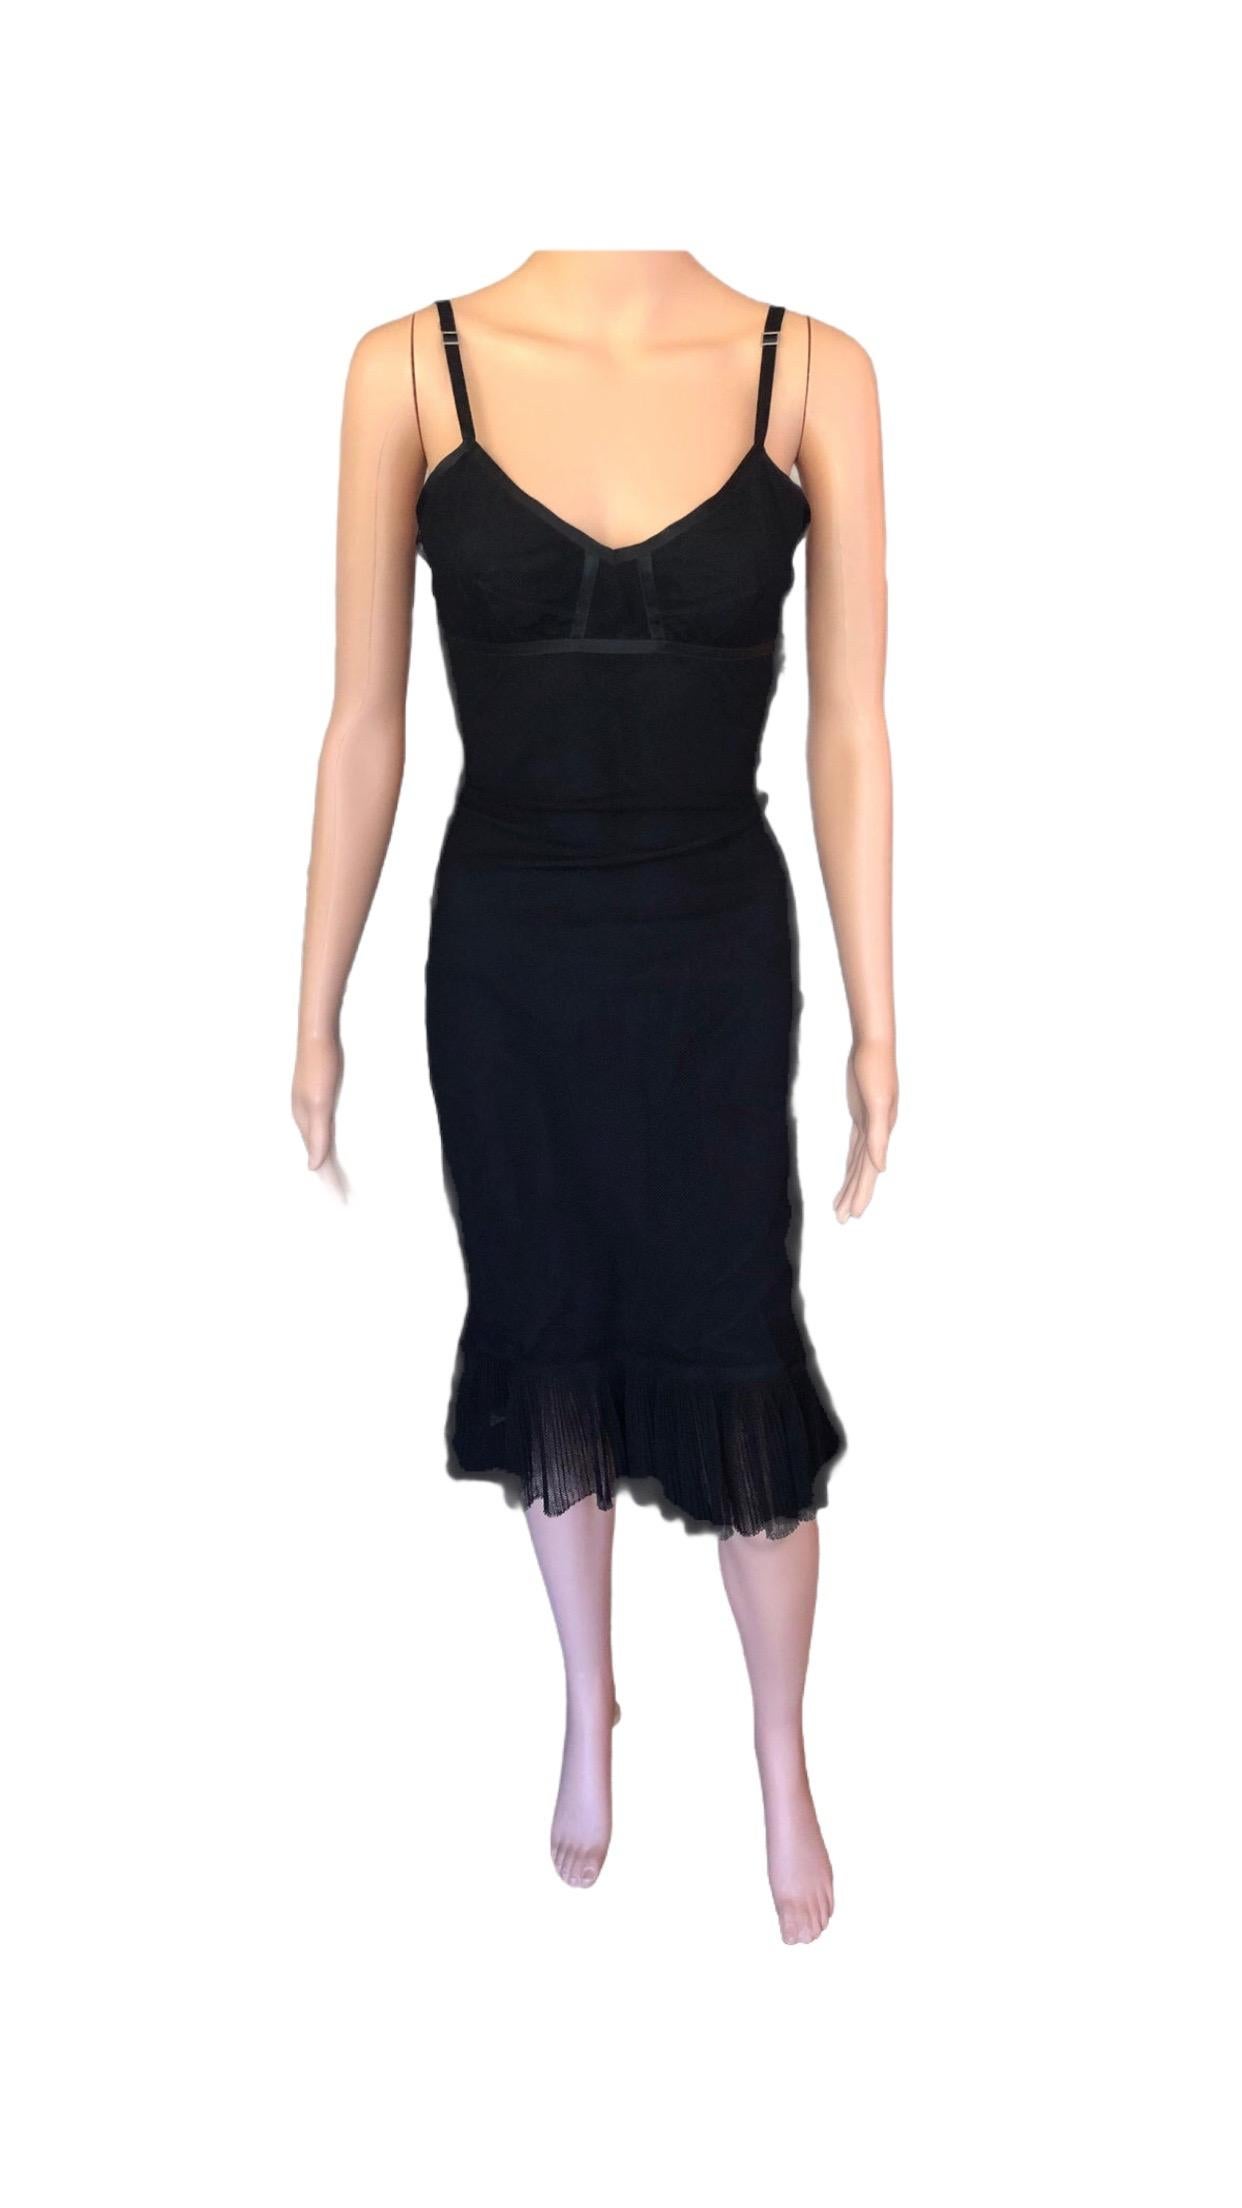 Gucci by Tom Ford F/W 2001 Cutout Back Mesh Black Dress For Sale 5